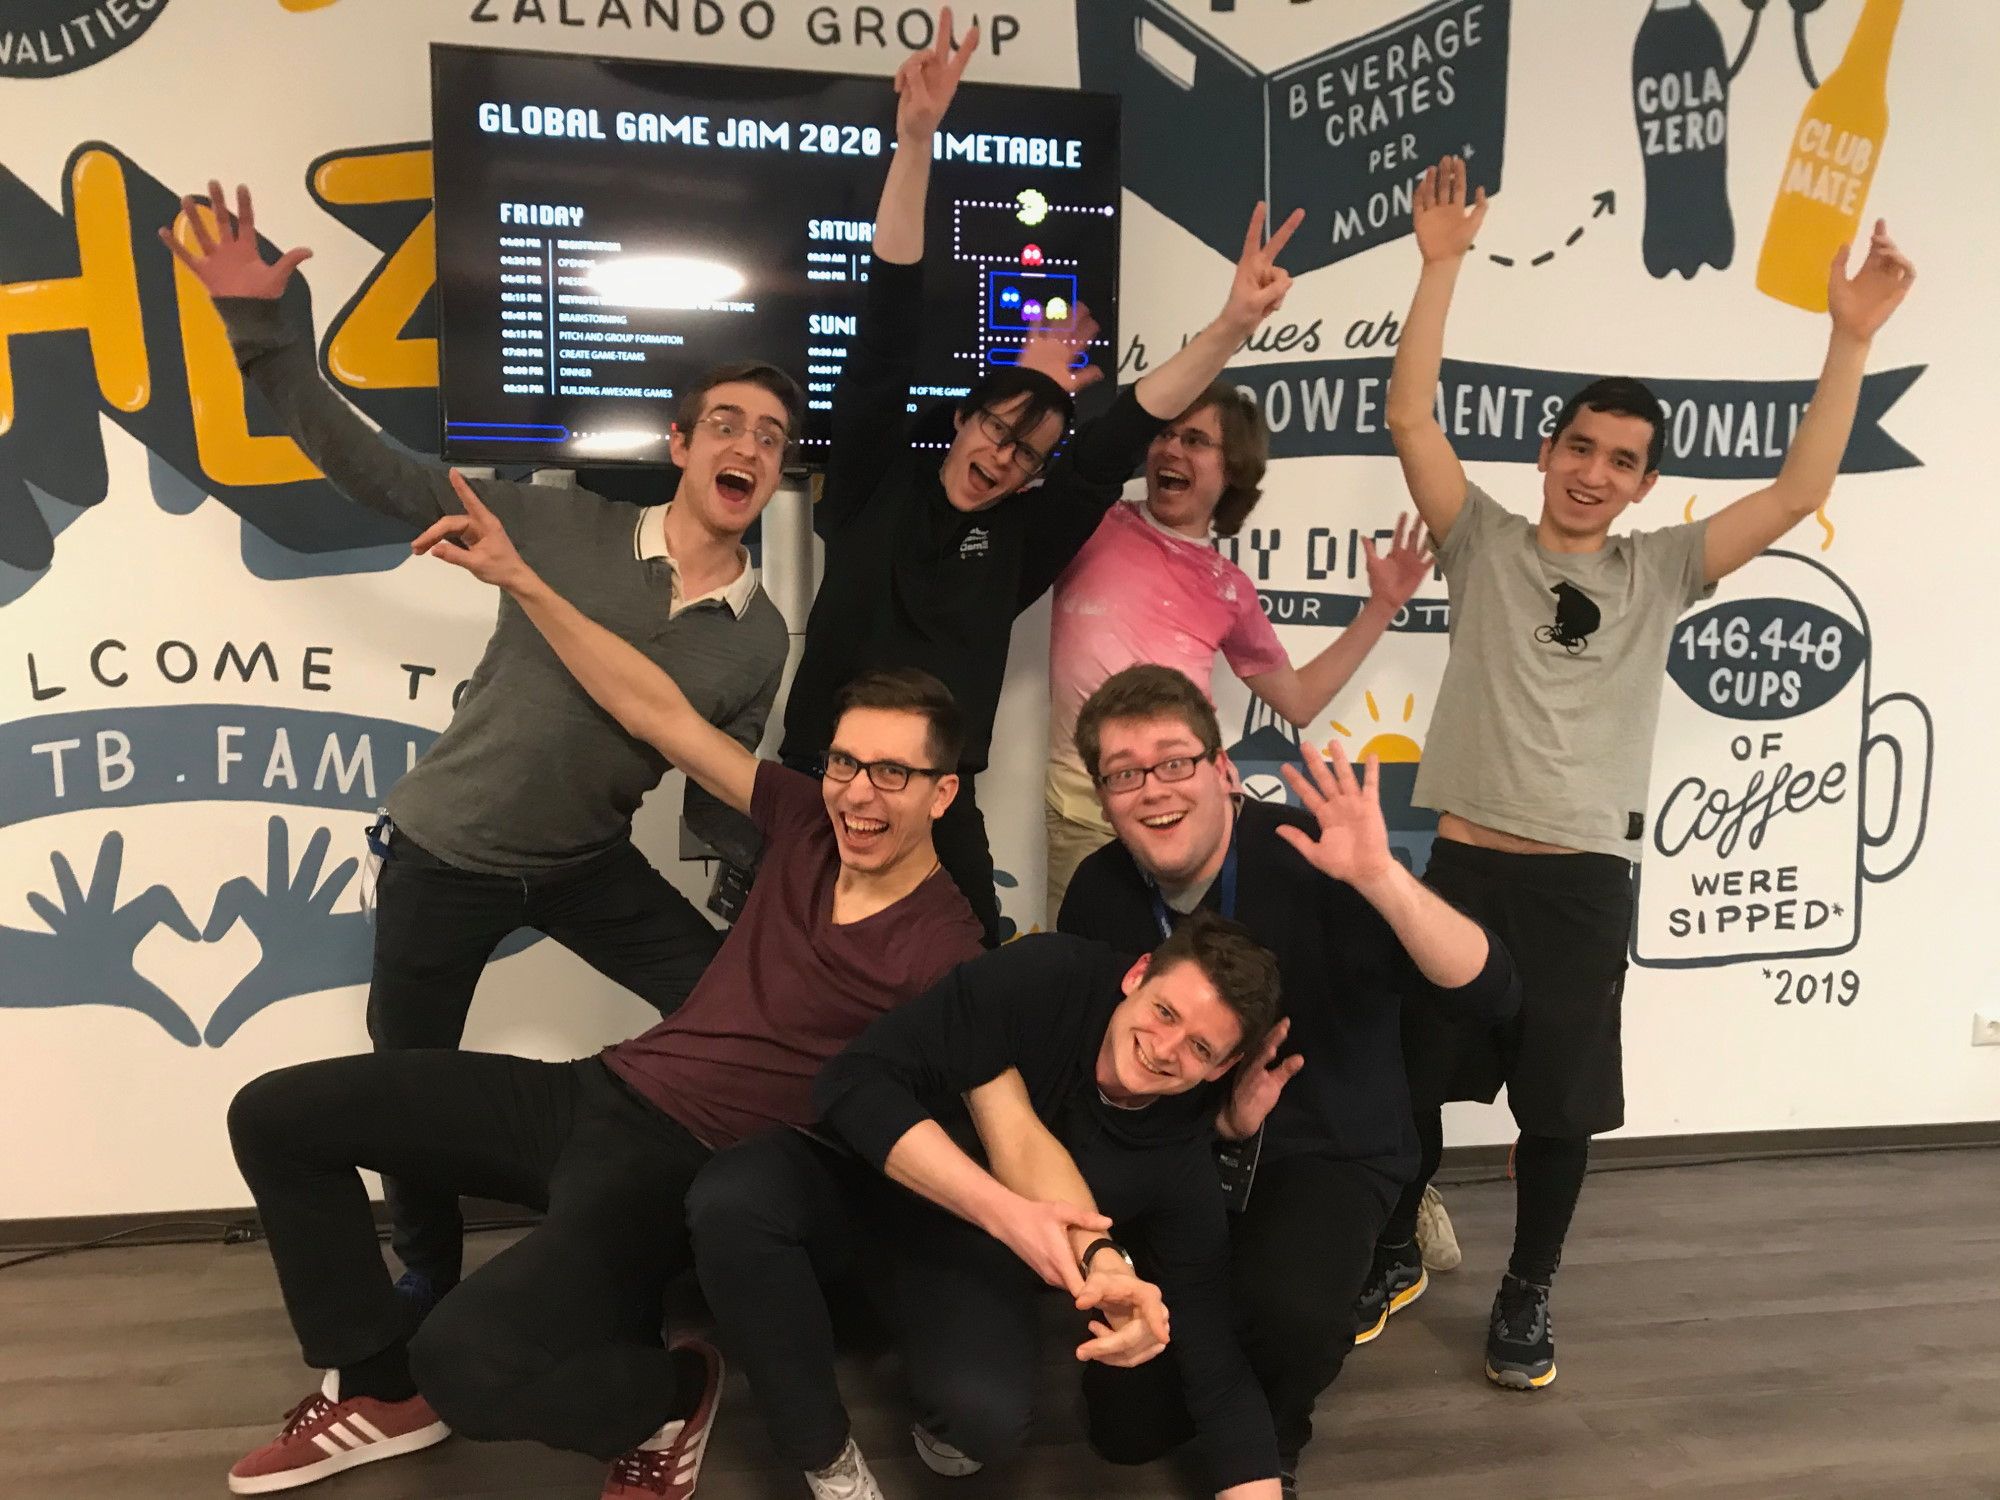 Group shot of the 'Quick and Dirty' team at the Global Game Jam 2020 in Ansbach. 